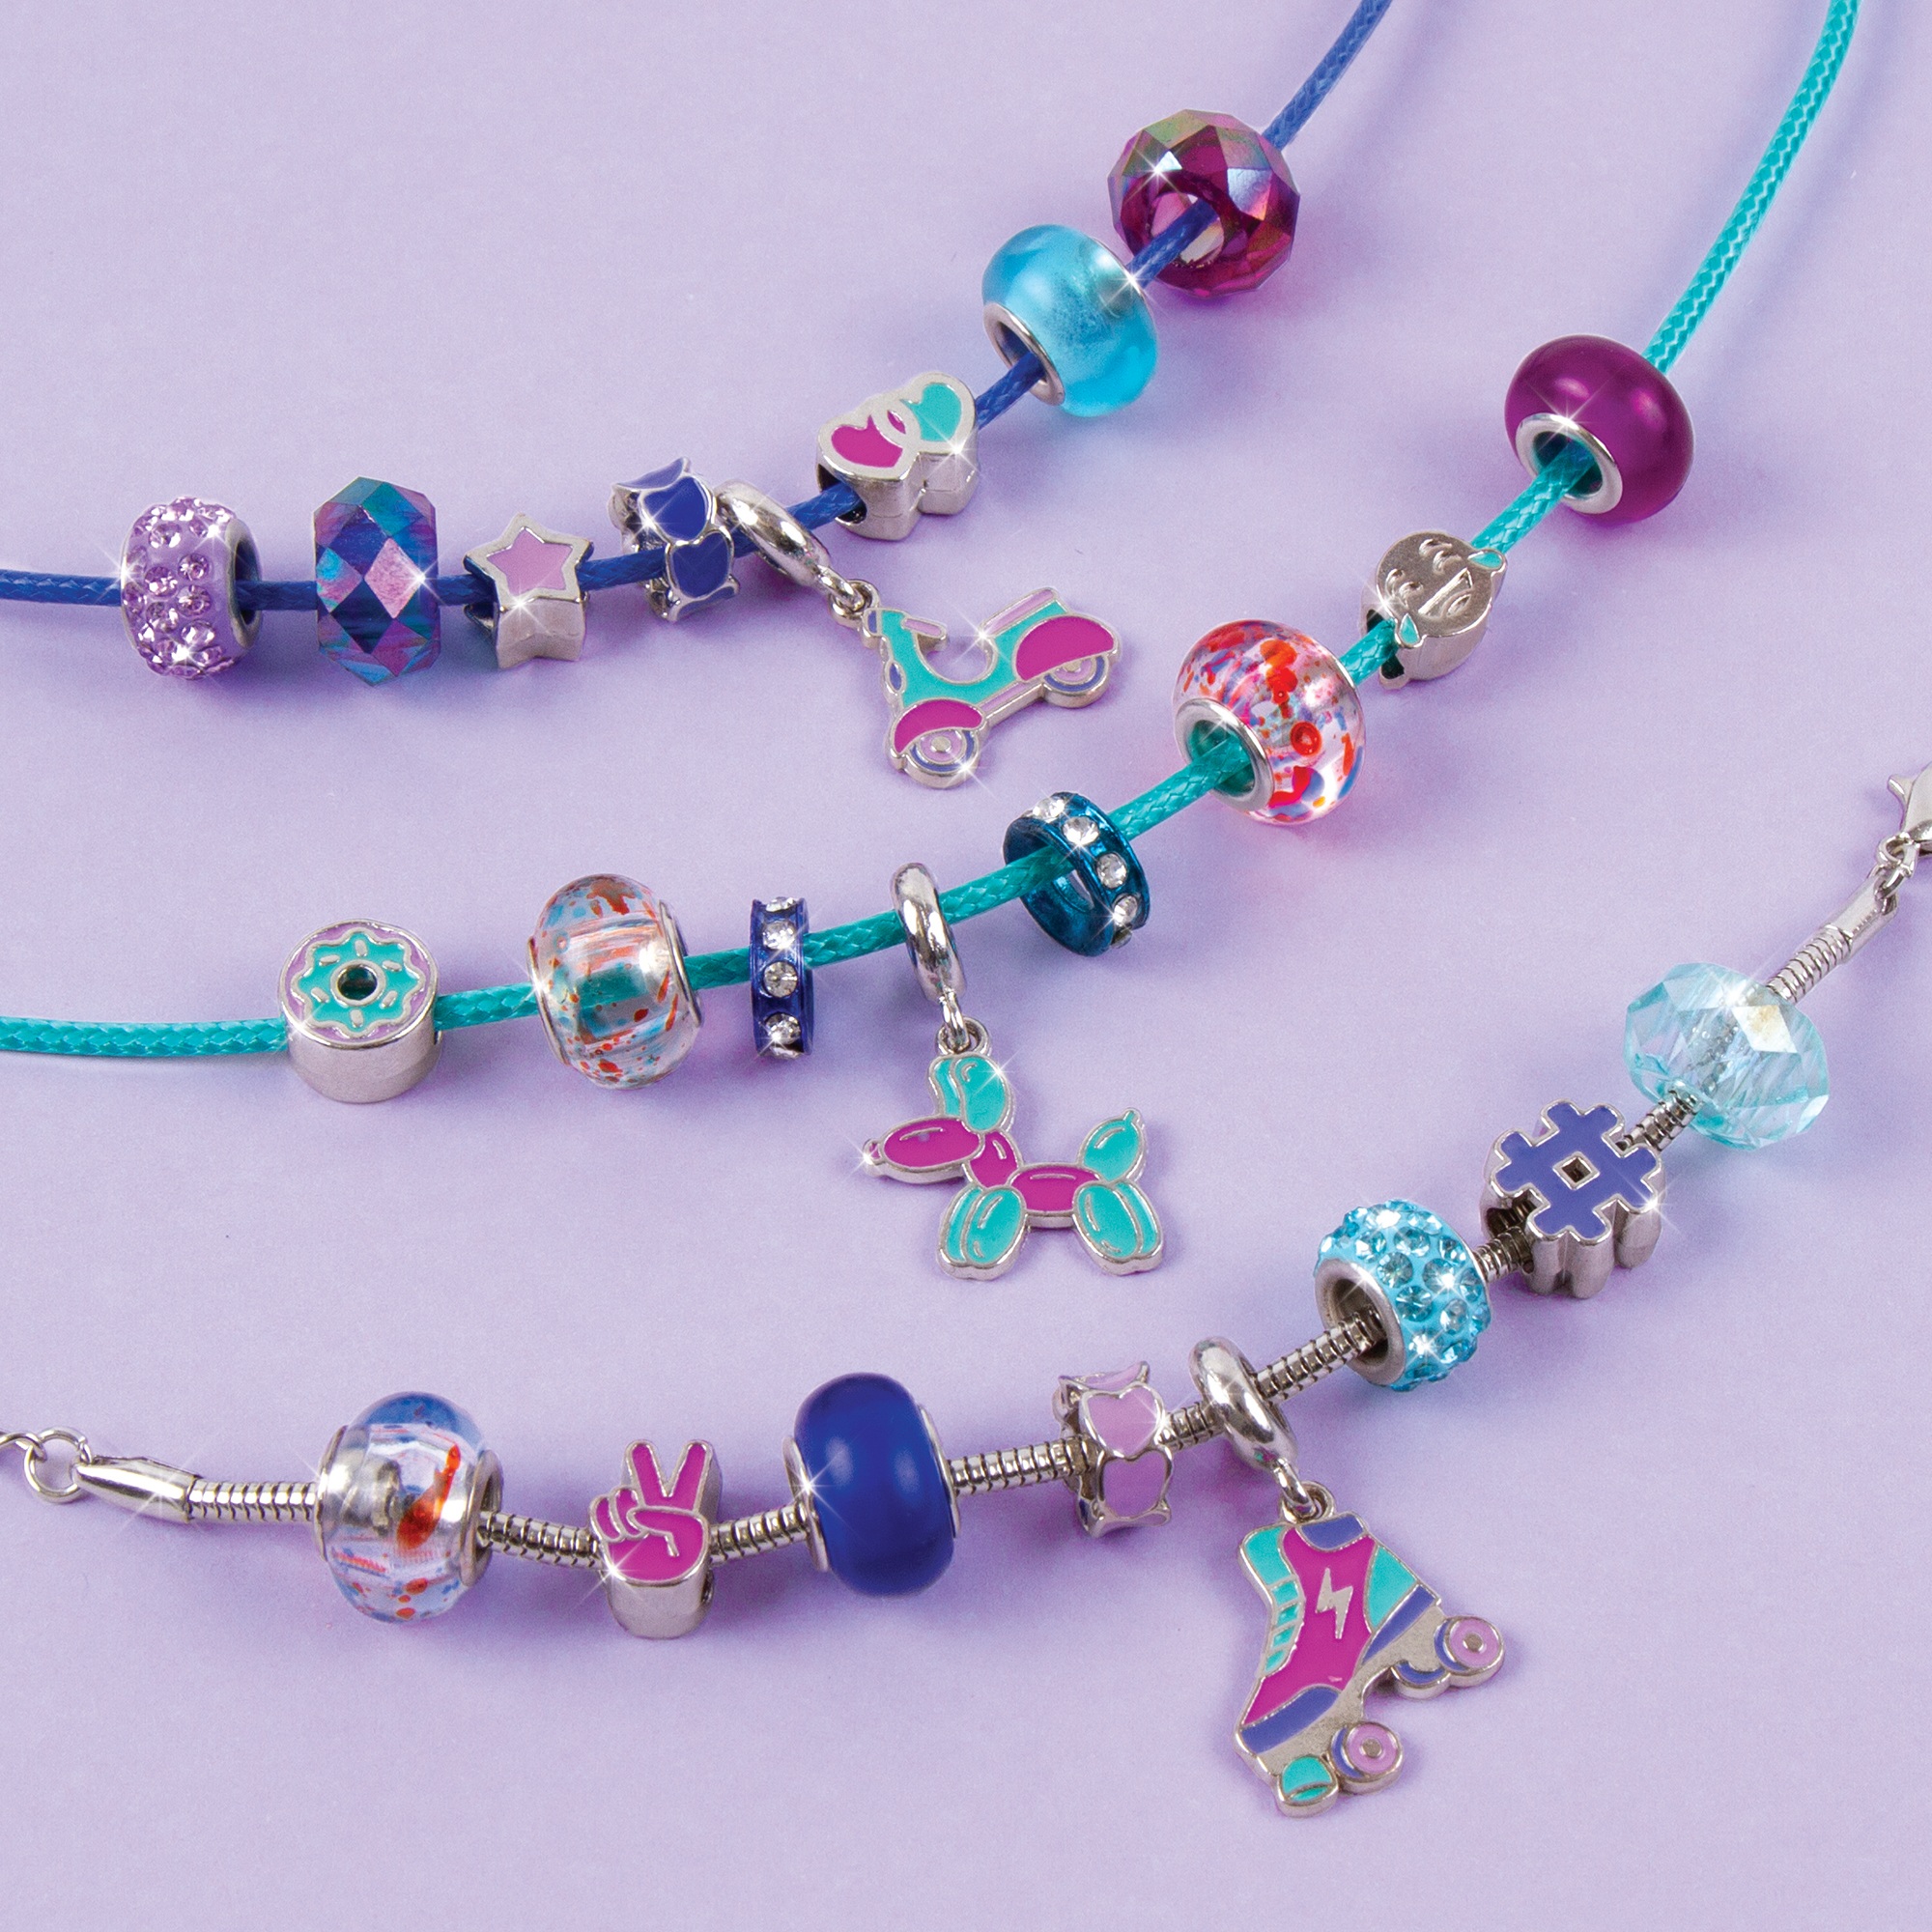 Make It Real: Halo Charms Bracelets - True Blue - Create 3 Metallic  Bracelets, 28 Pieces, All-In-One, DIY Unique Charm & Bead Jewelry Kit,  Tweens & Girls, Arts & Crafts, Kids Ages